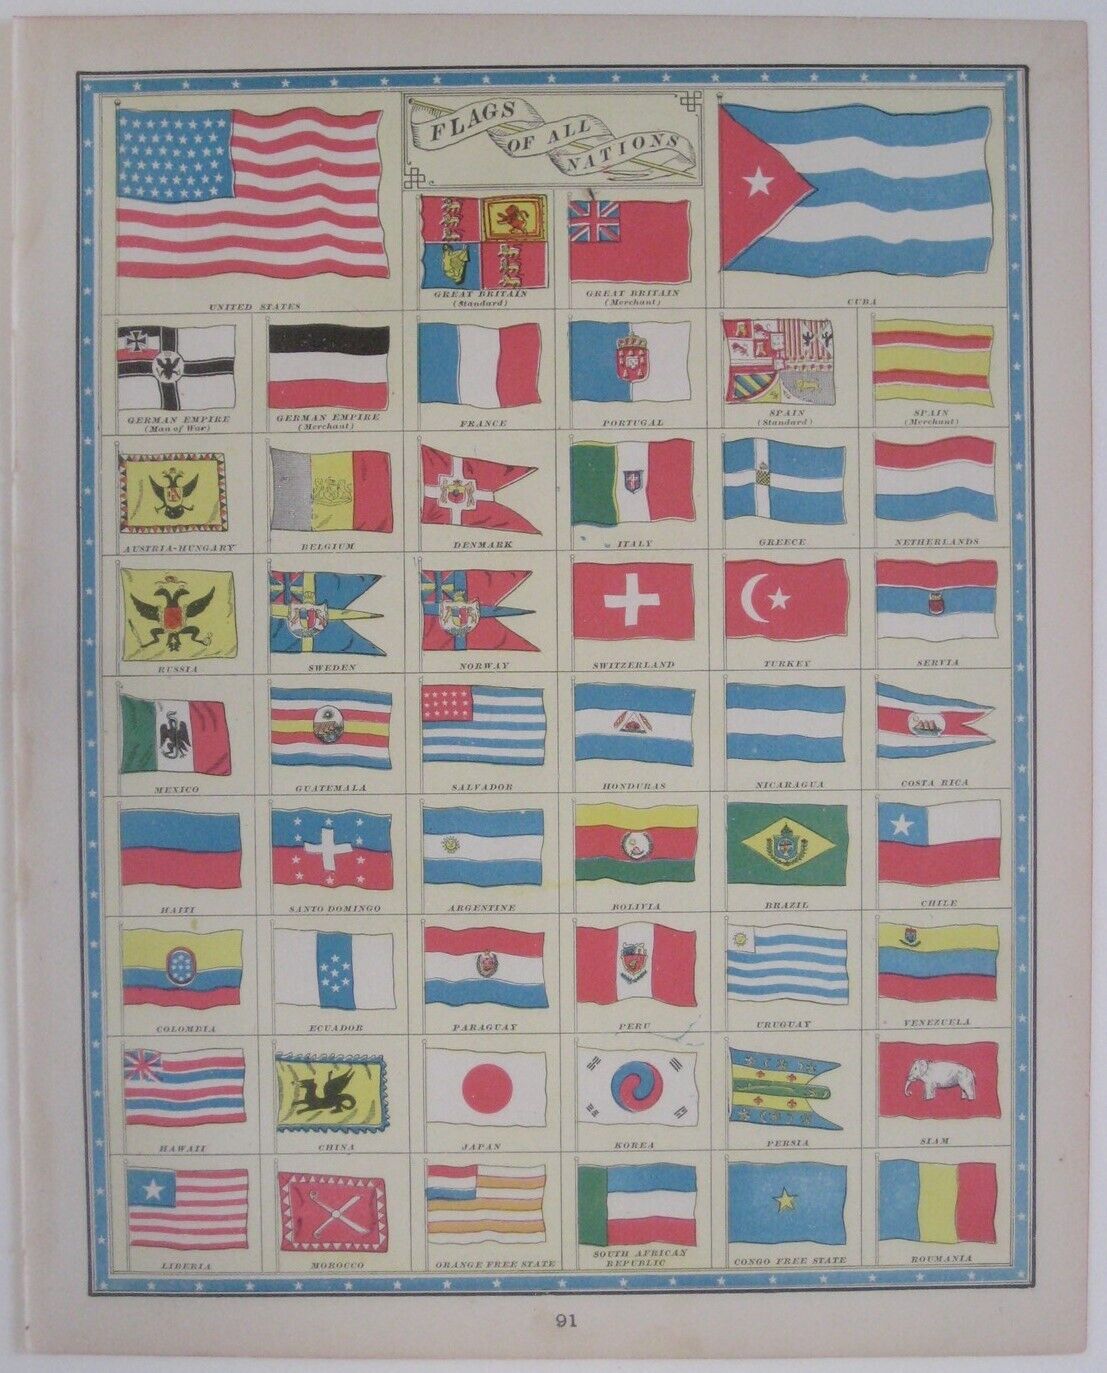 Original 1899 Color Lithograph FLAGS OF ALL NATIONS 44-Star United States Flag